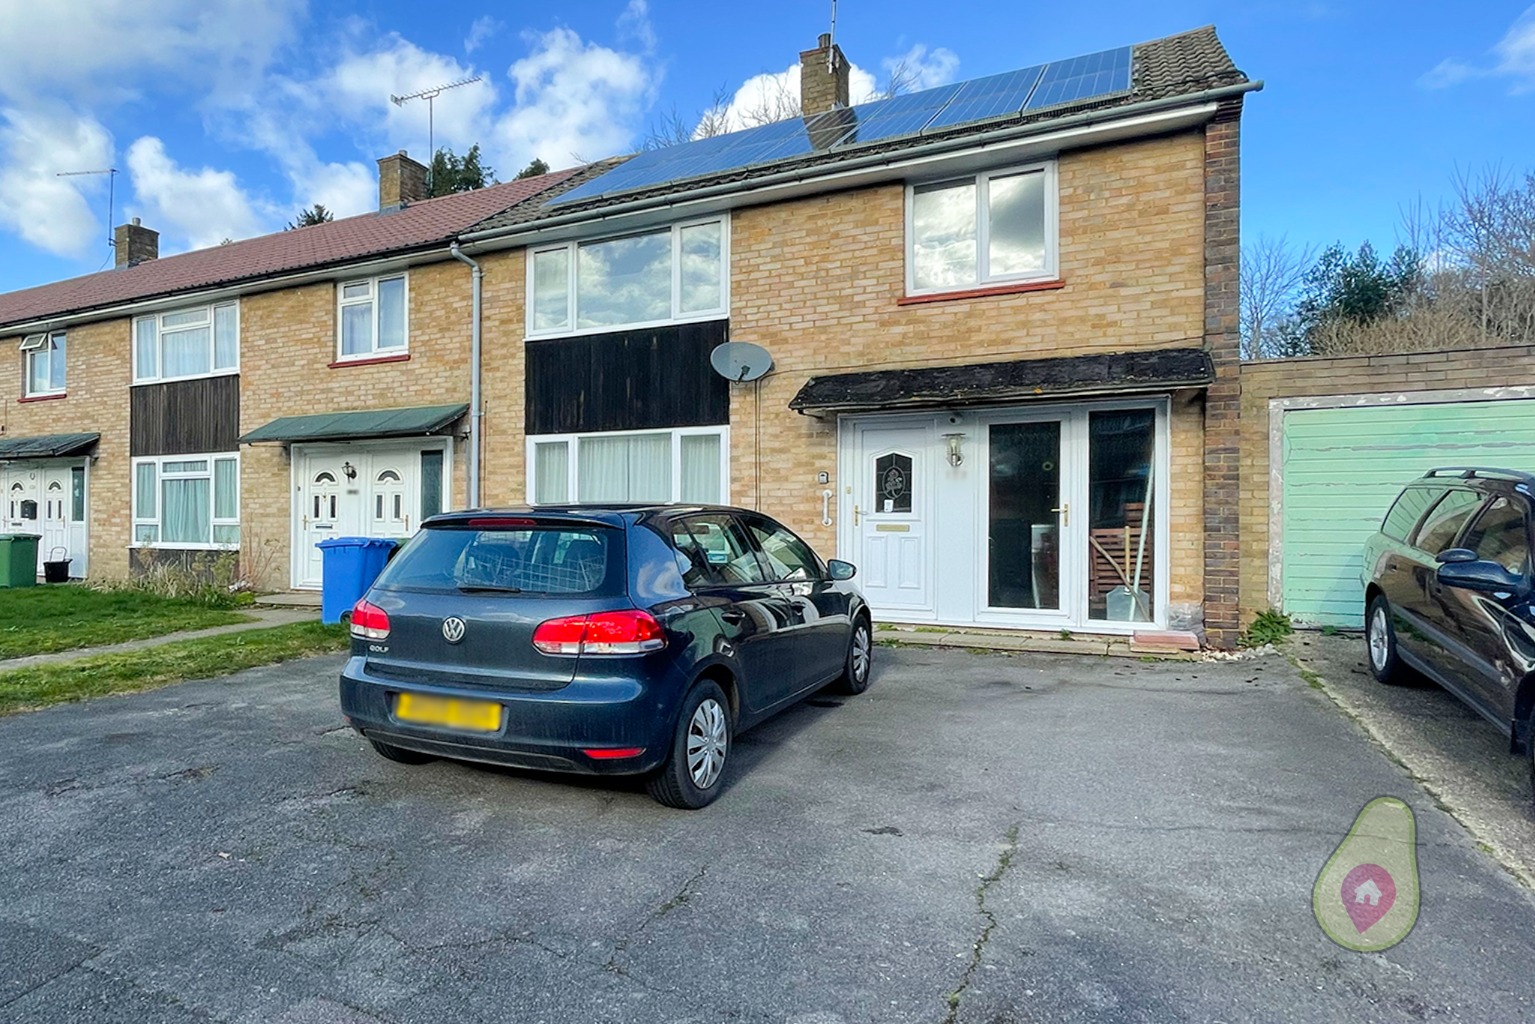 A well presented 3 bedroom home in the Harmans Water suburb of Bracknell, approximately 1 mile from The Lexicon Shopping Centre and Bracknell Train Station. Offered to the market with no onward chain and offering great potential to extend, subject to the usual planning permissions.